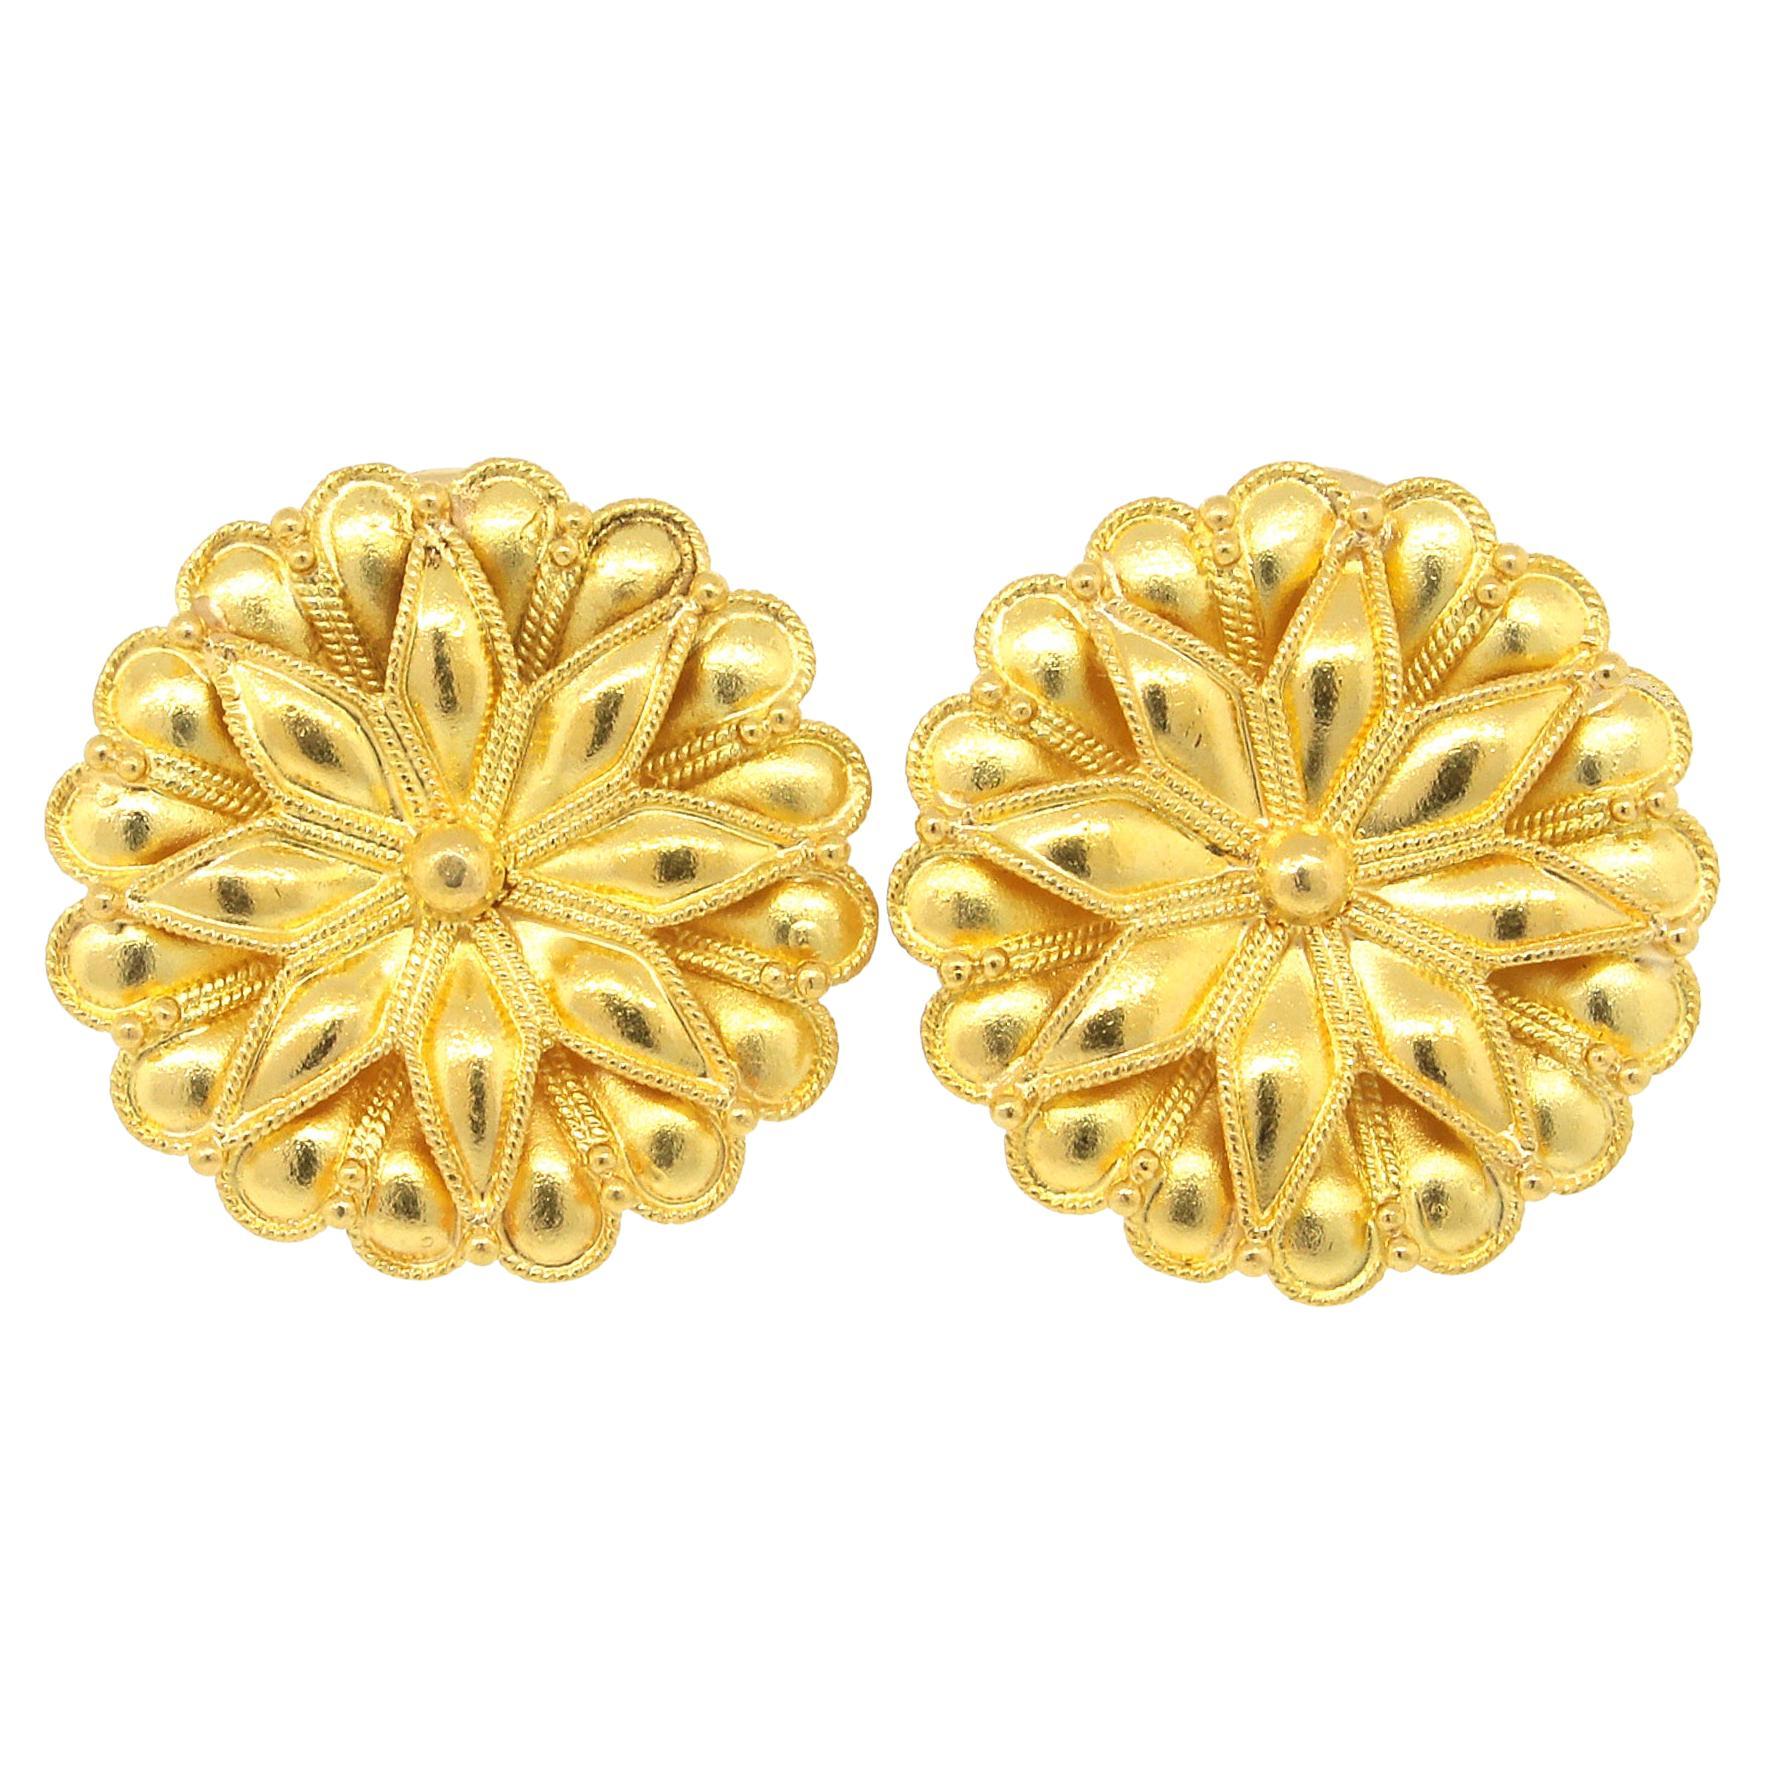 Zolotas Vintage Floral Yellow Gold Clip-on Earrings